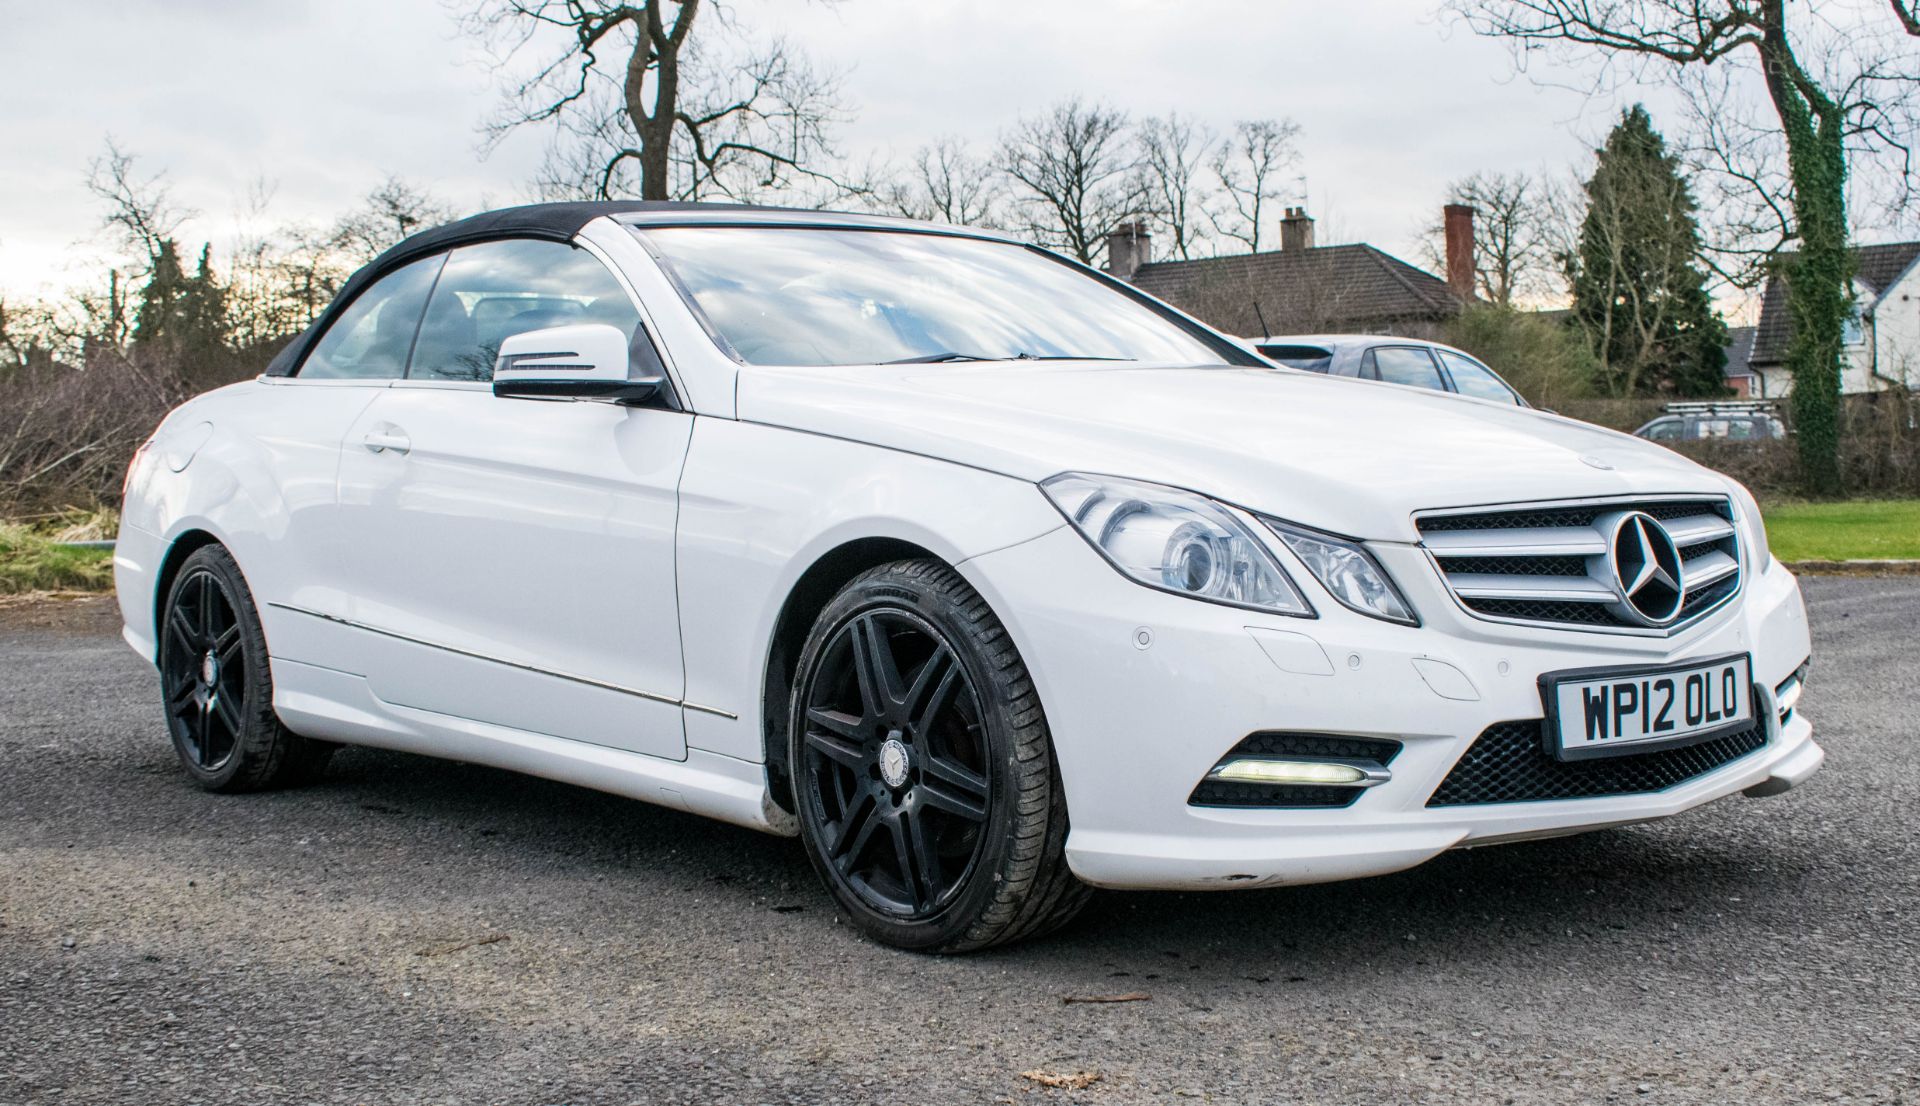 Mercedes Benz E250 sport CDI diesel convertible car Registration number: WP12 OLO Date of - Image 2 of 20